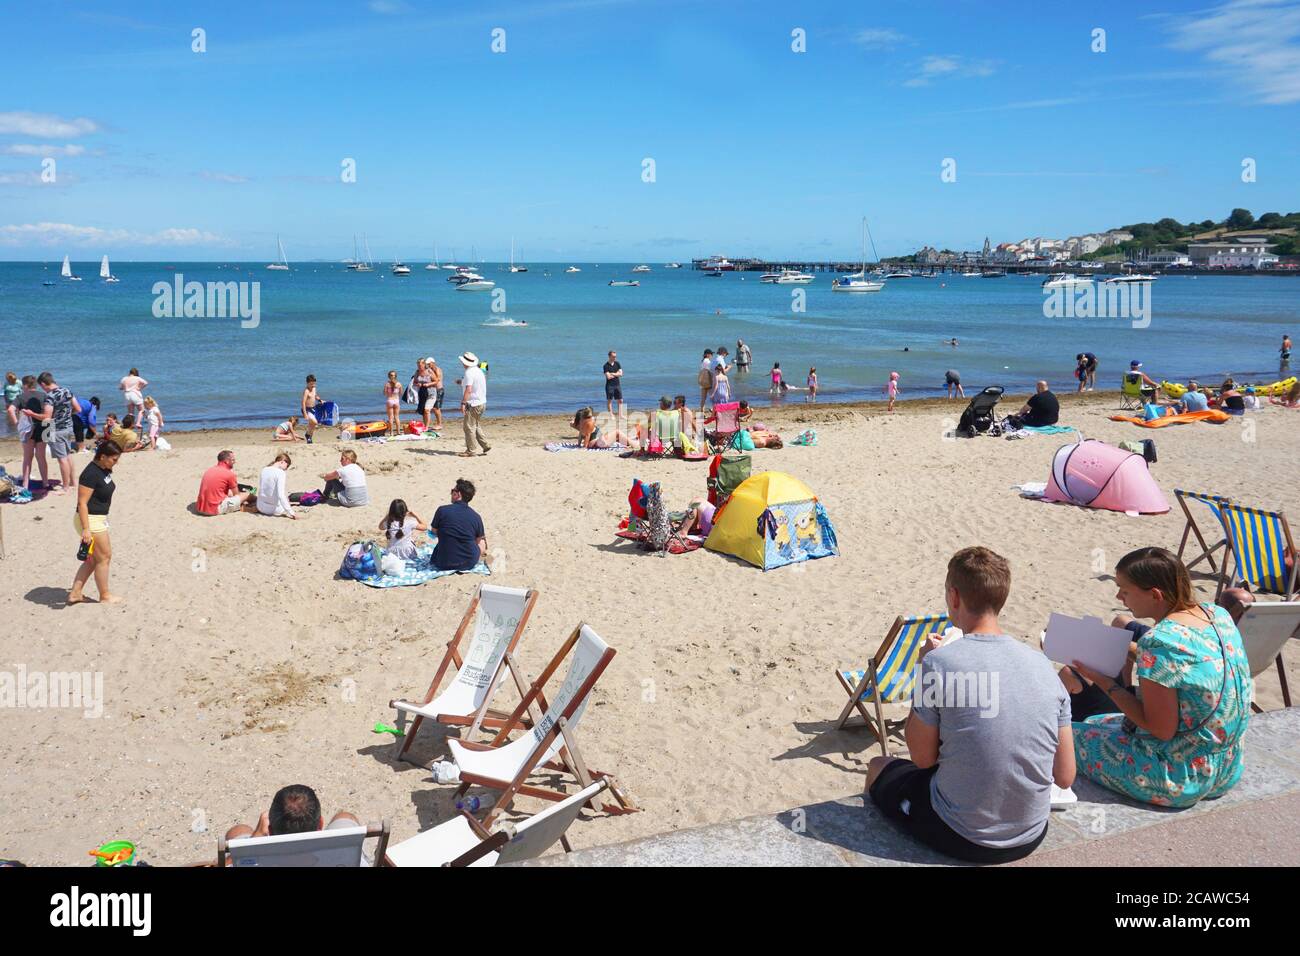 Visitors flock to the sandy beaches at Swanage making the best of the sunny weather, Dorset, UK Stock Photo